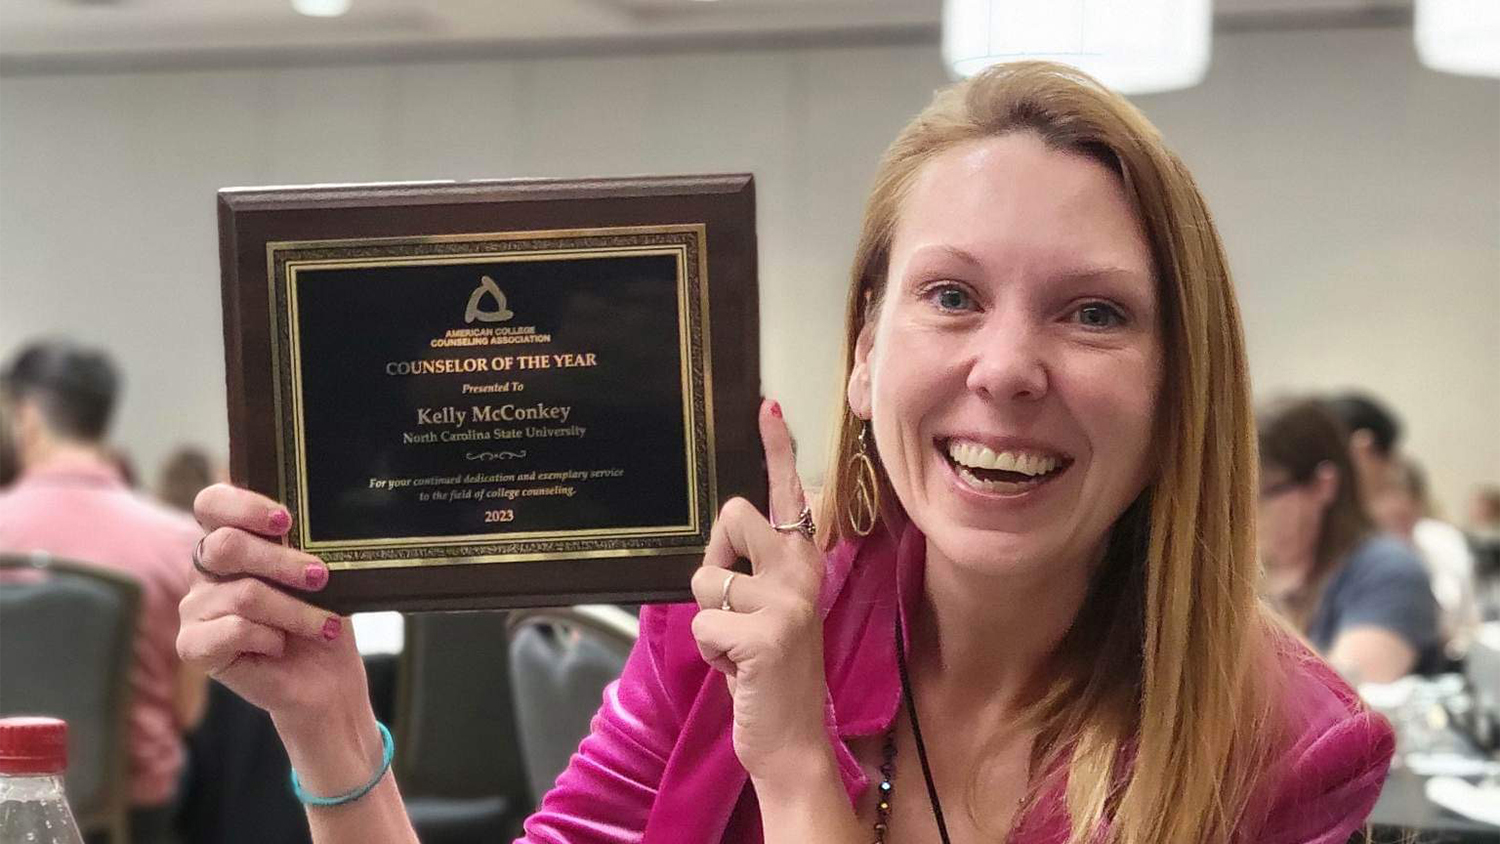 Kelly McConkey holds up a plaque recognizing her as national counselor of the year